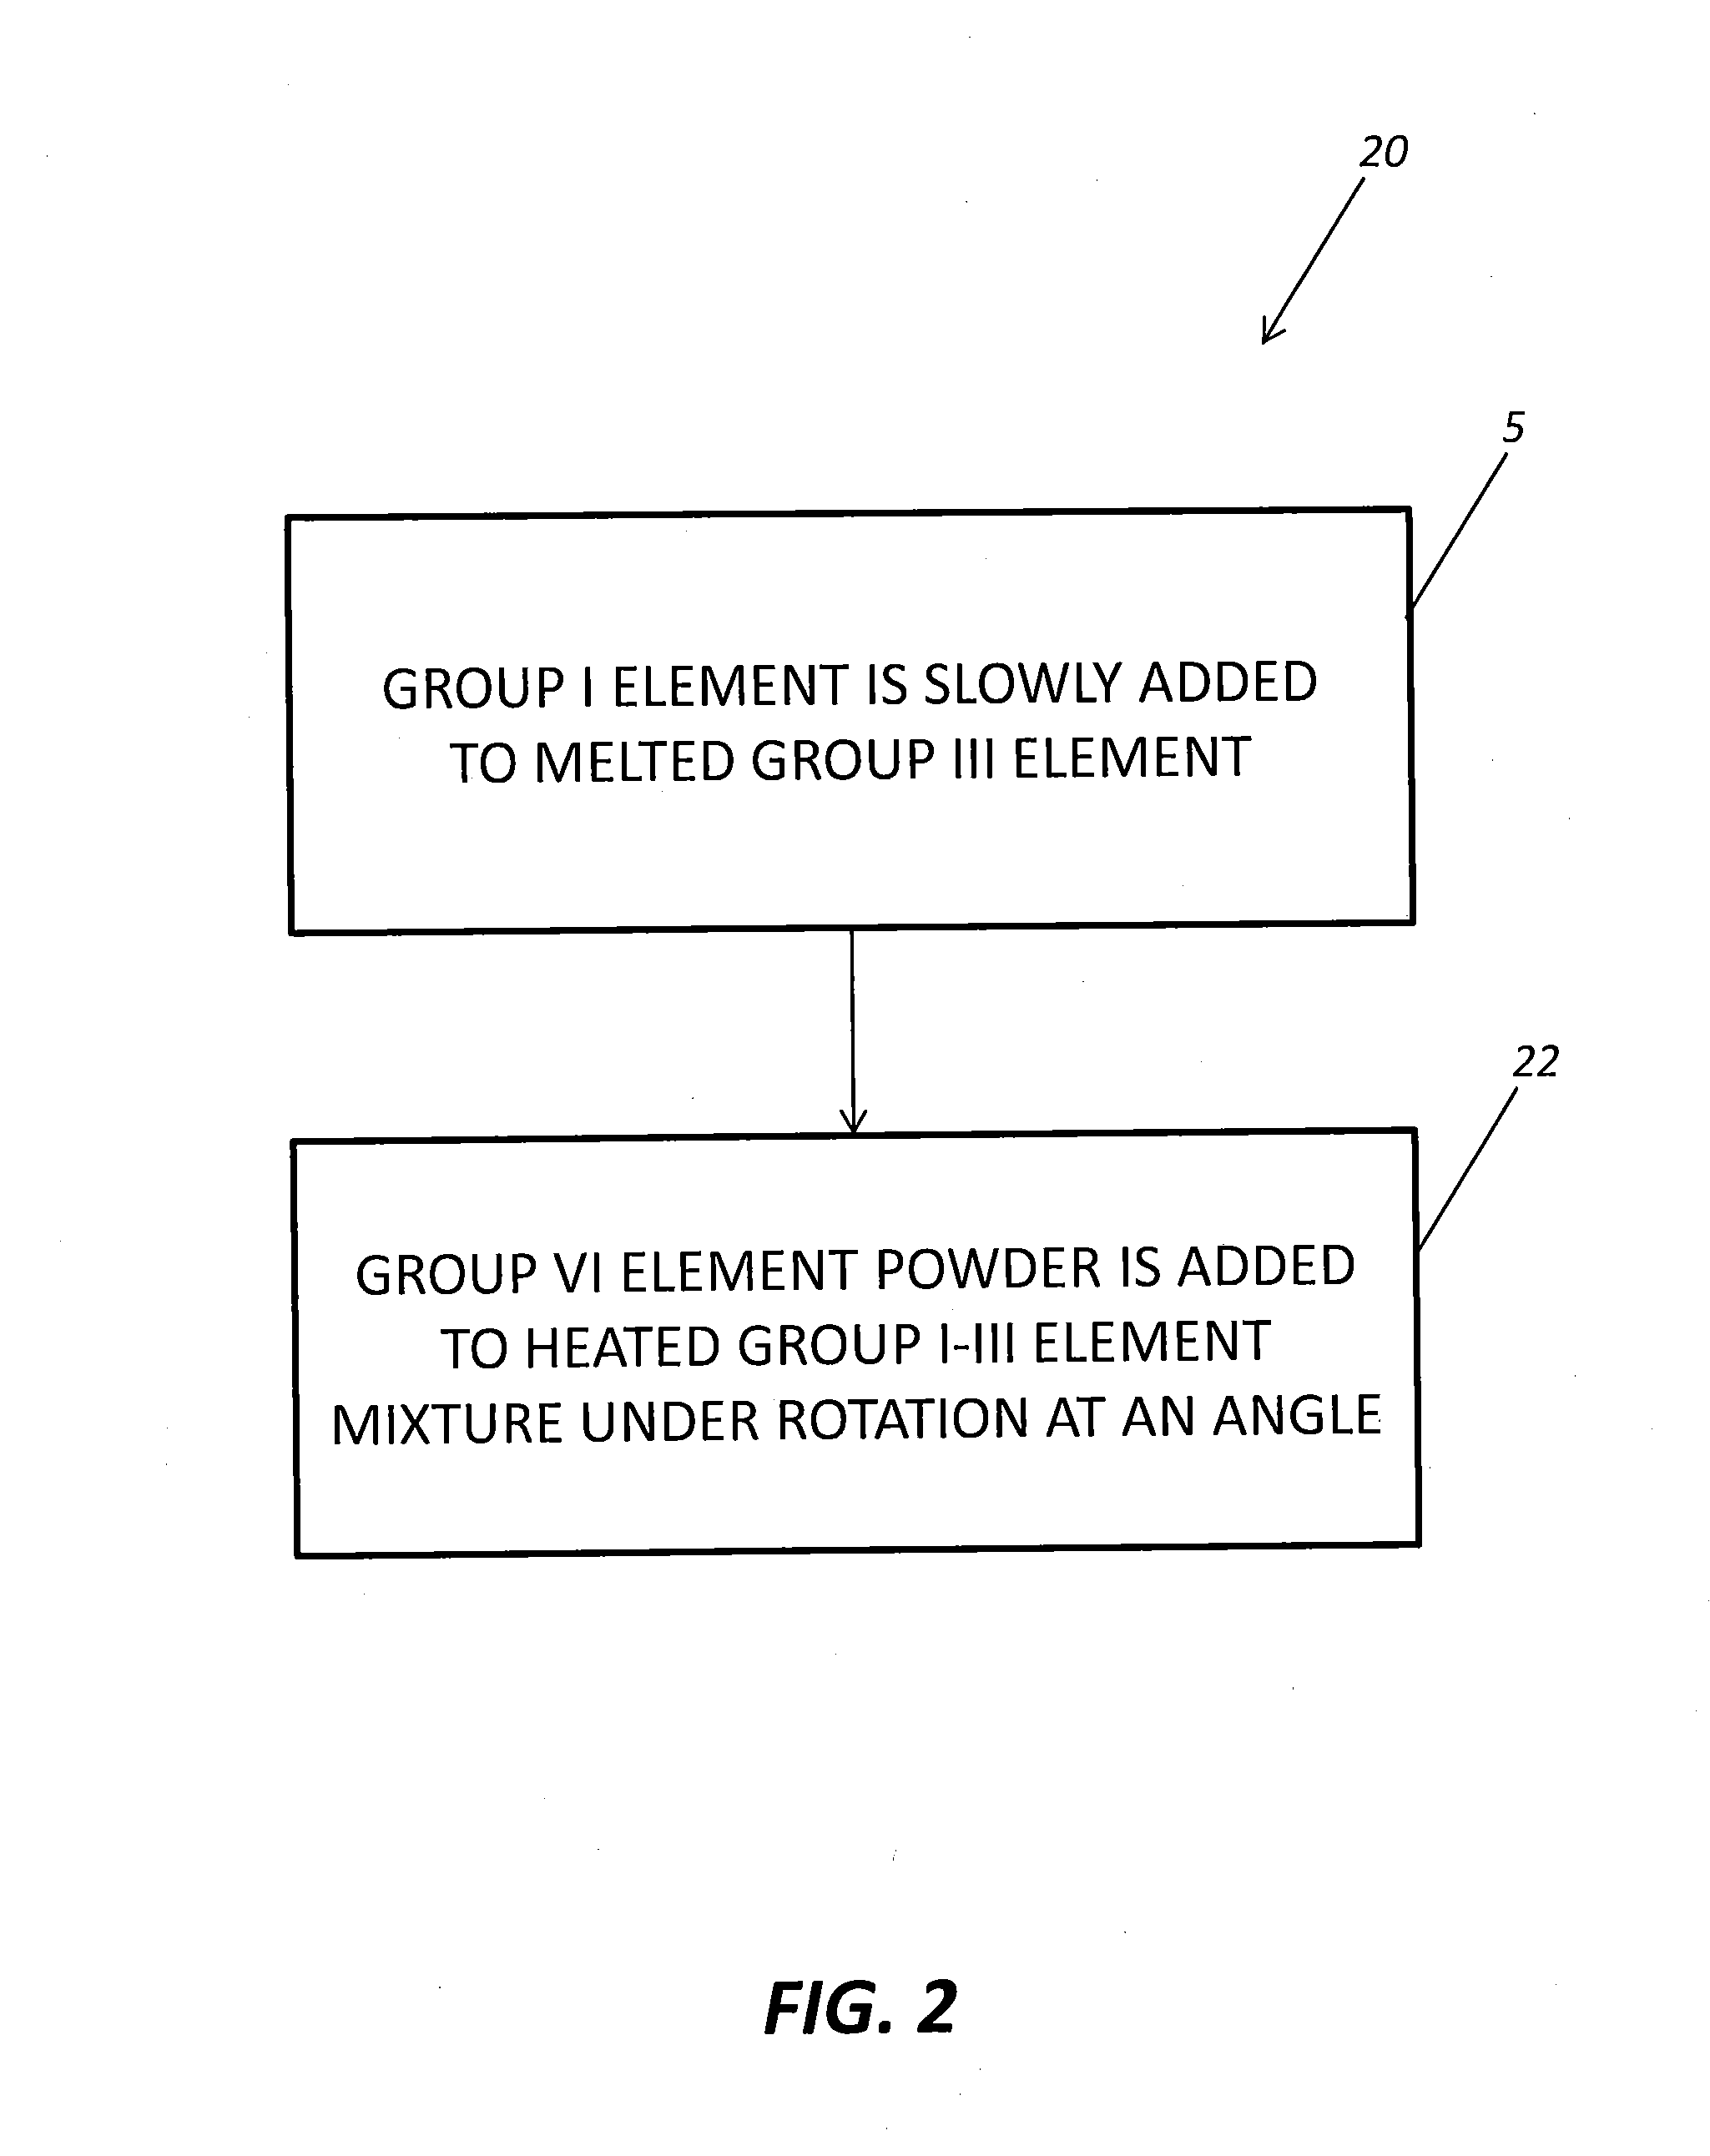 Thermal neutron detector and gamma-ray spectrometer utilizing a single material